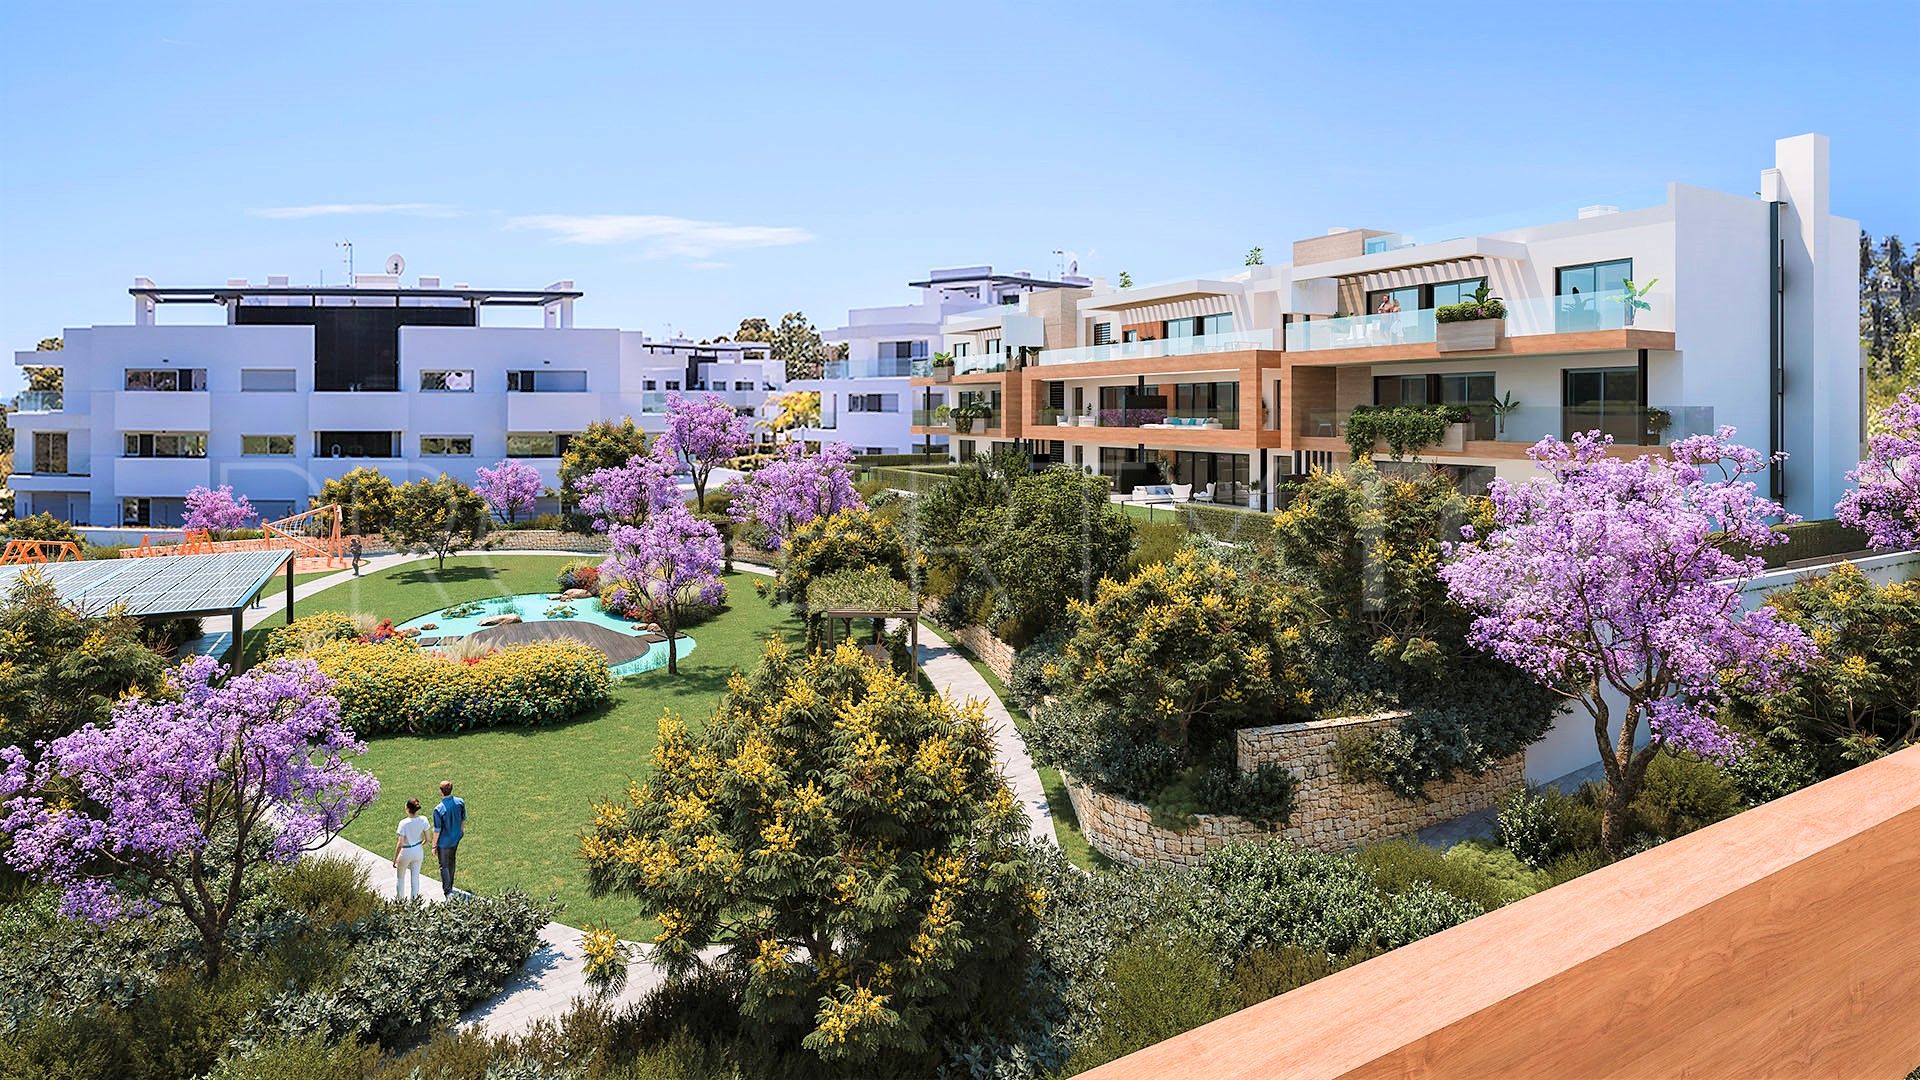 3 bedrooms duplex penthouse in Atalaya for sale